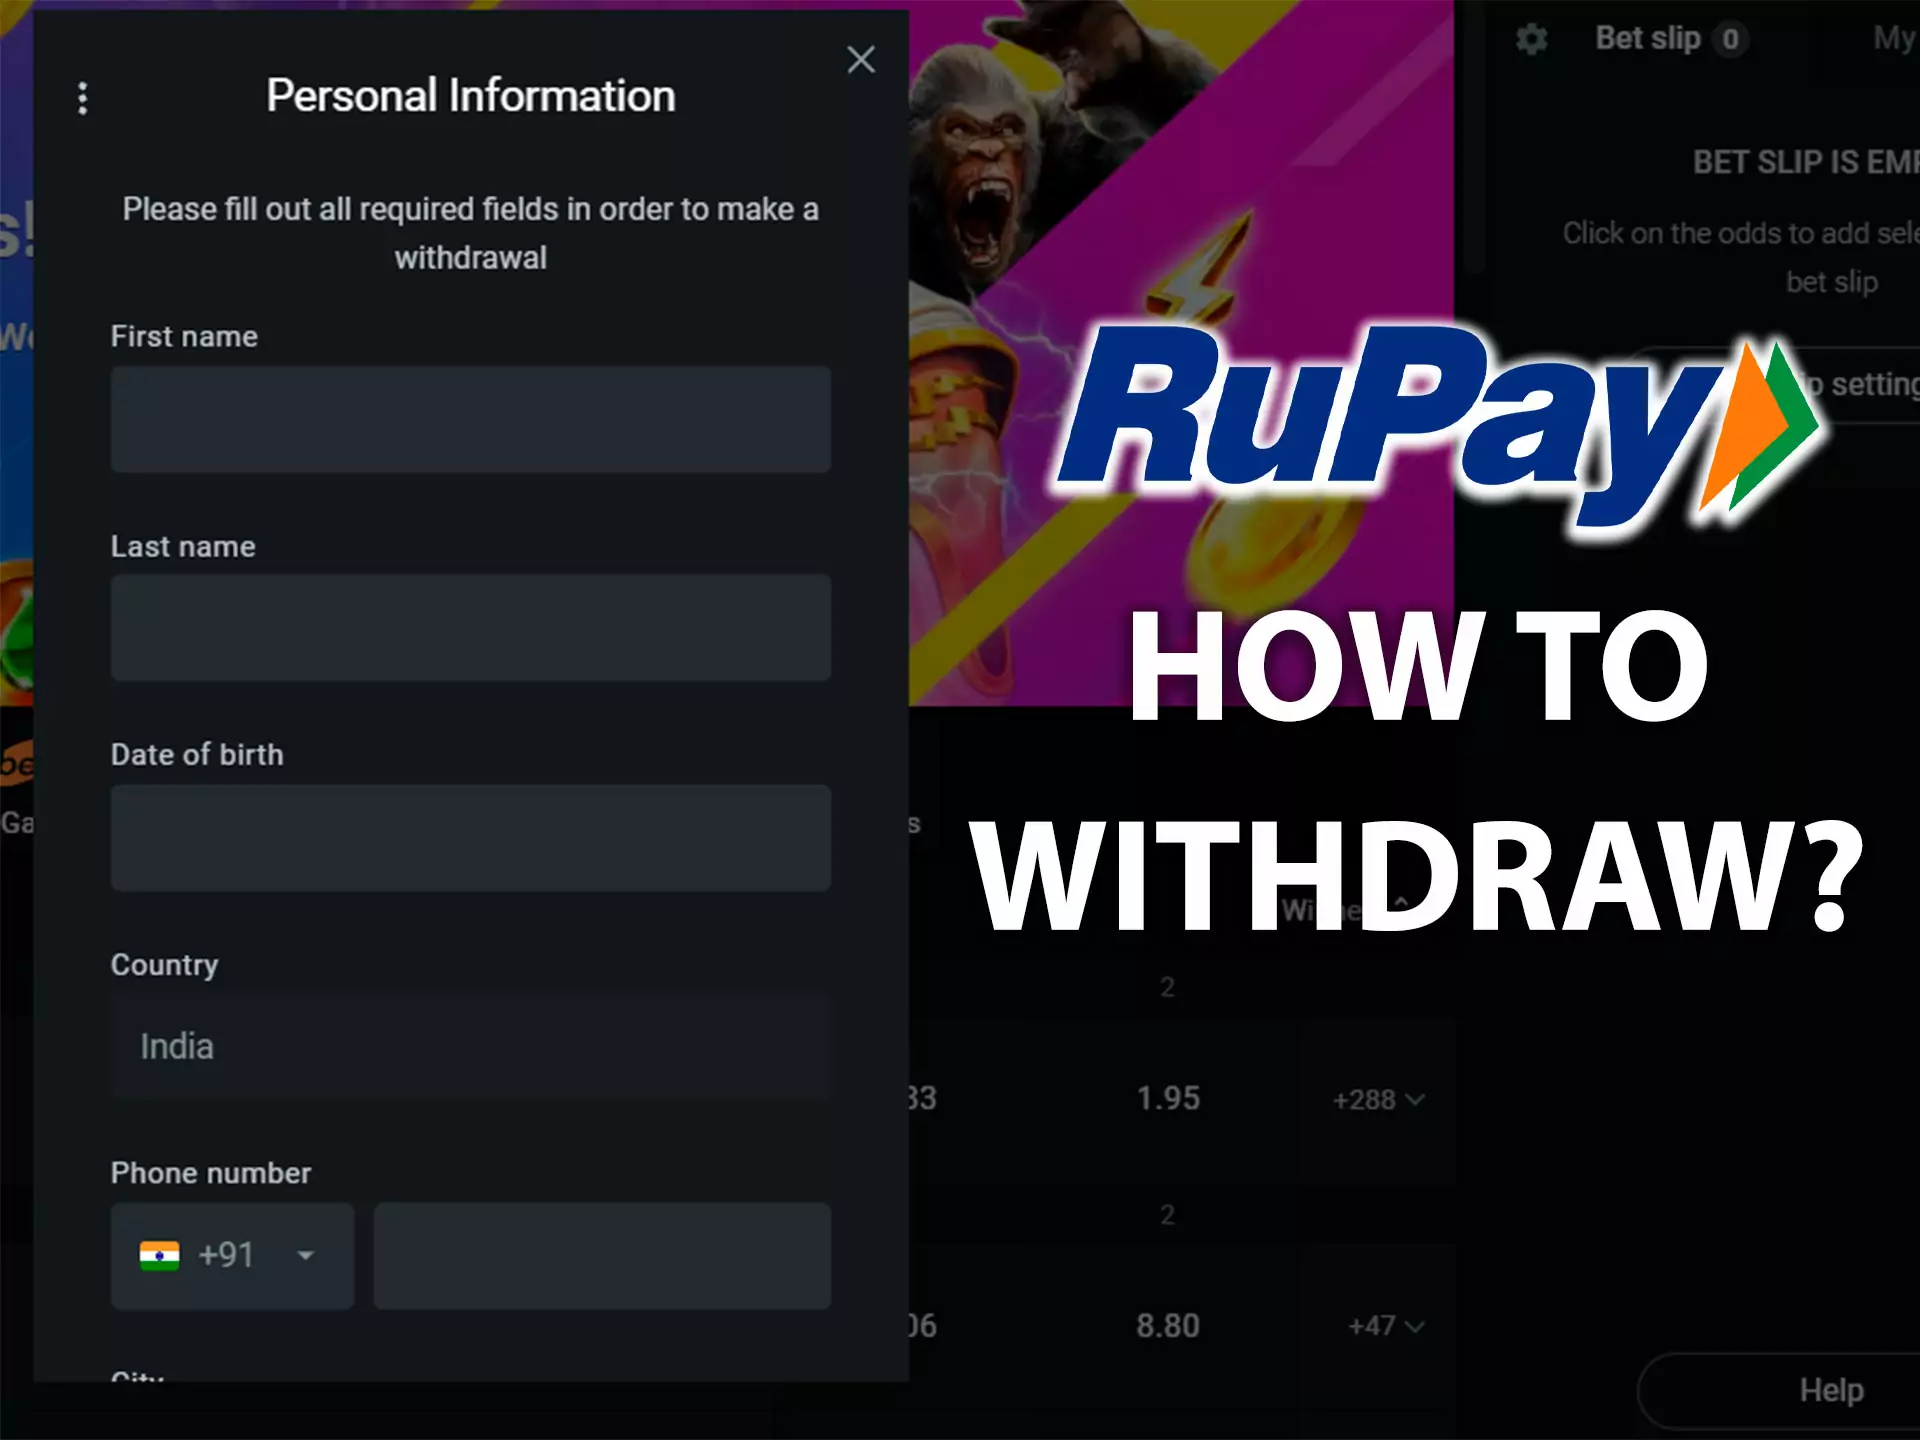 You can easily withdraw youe winnings on the RuPay card.